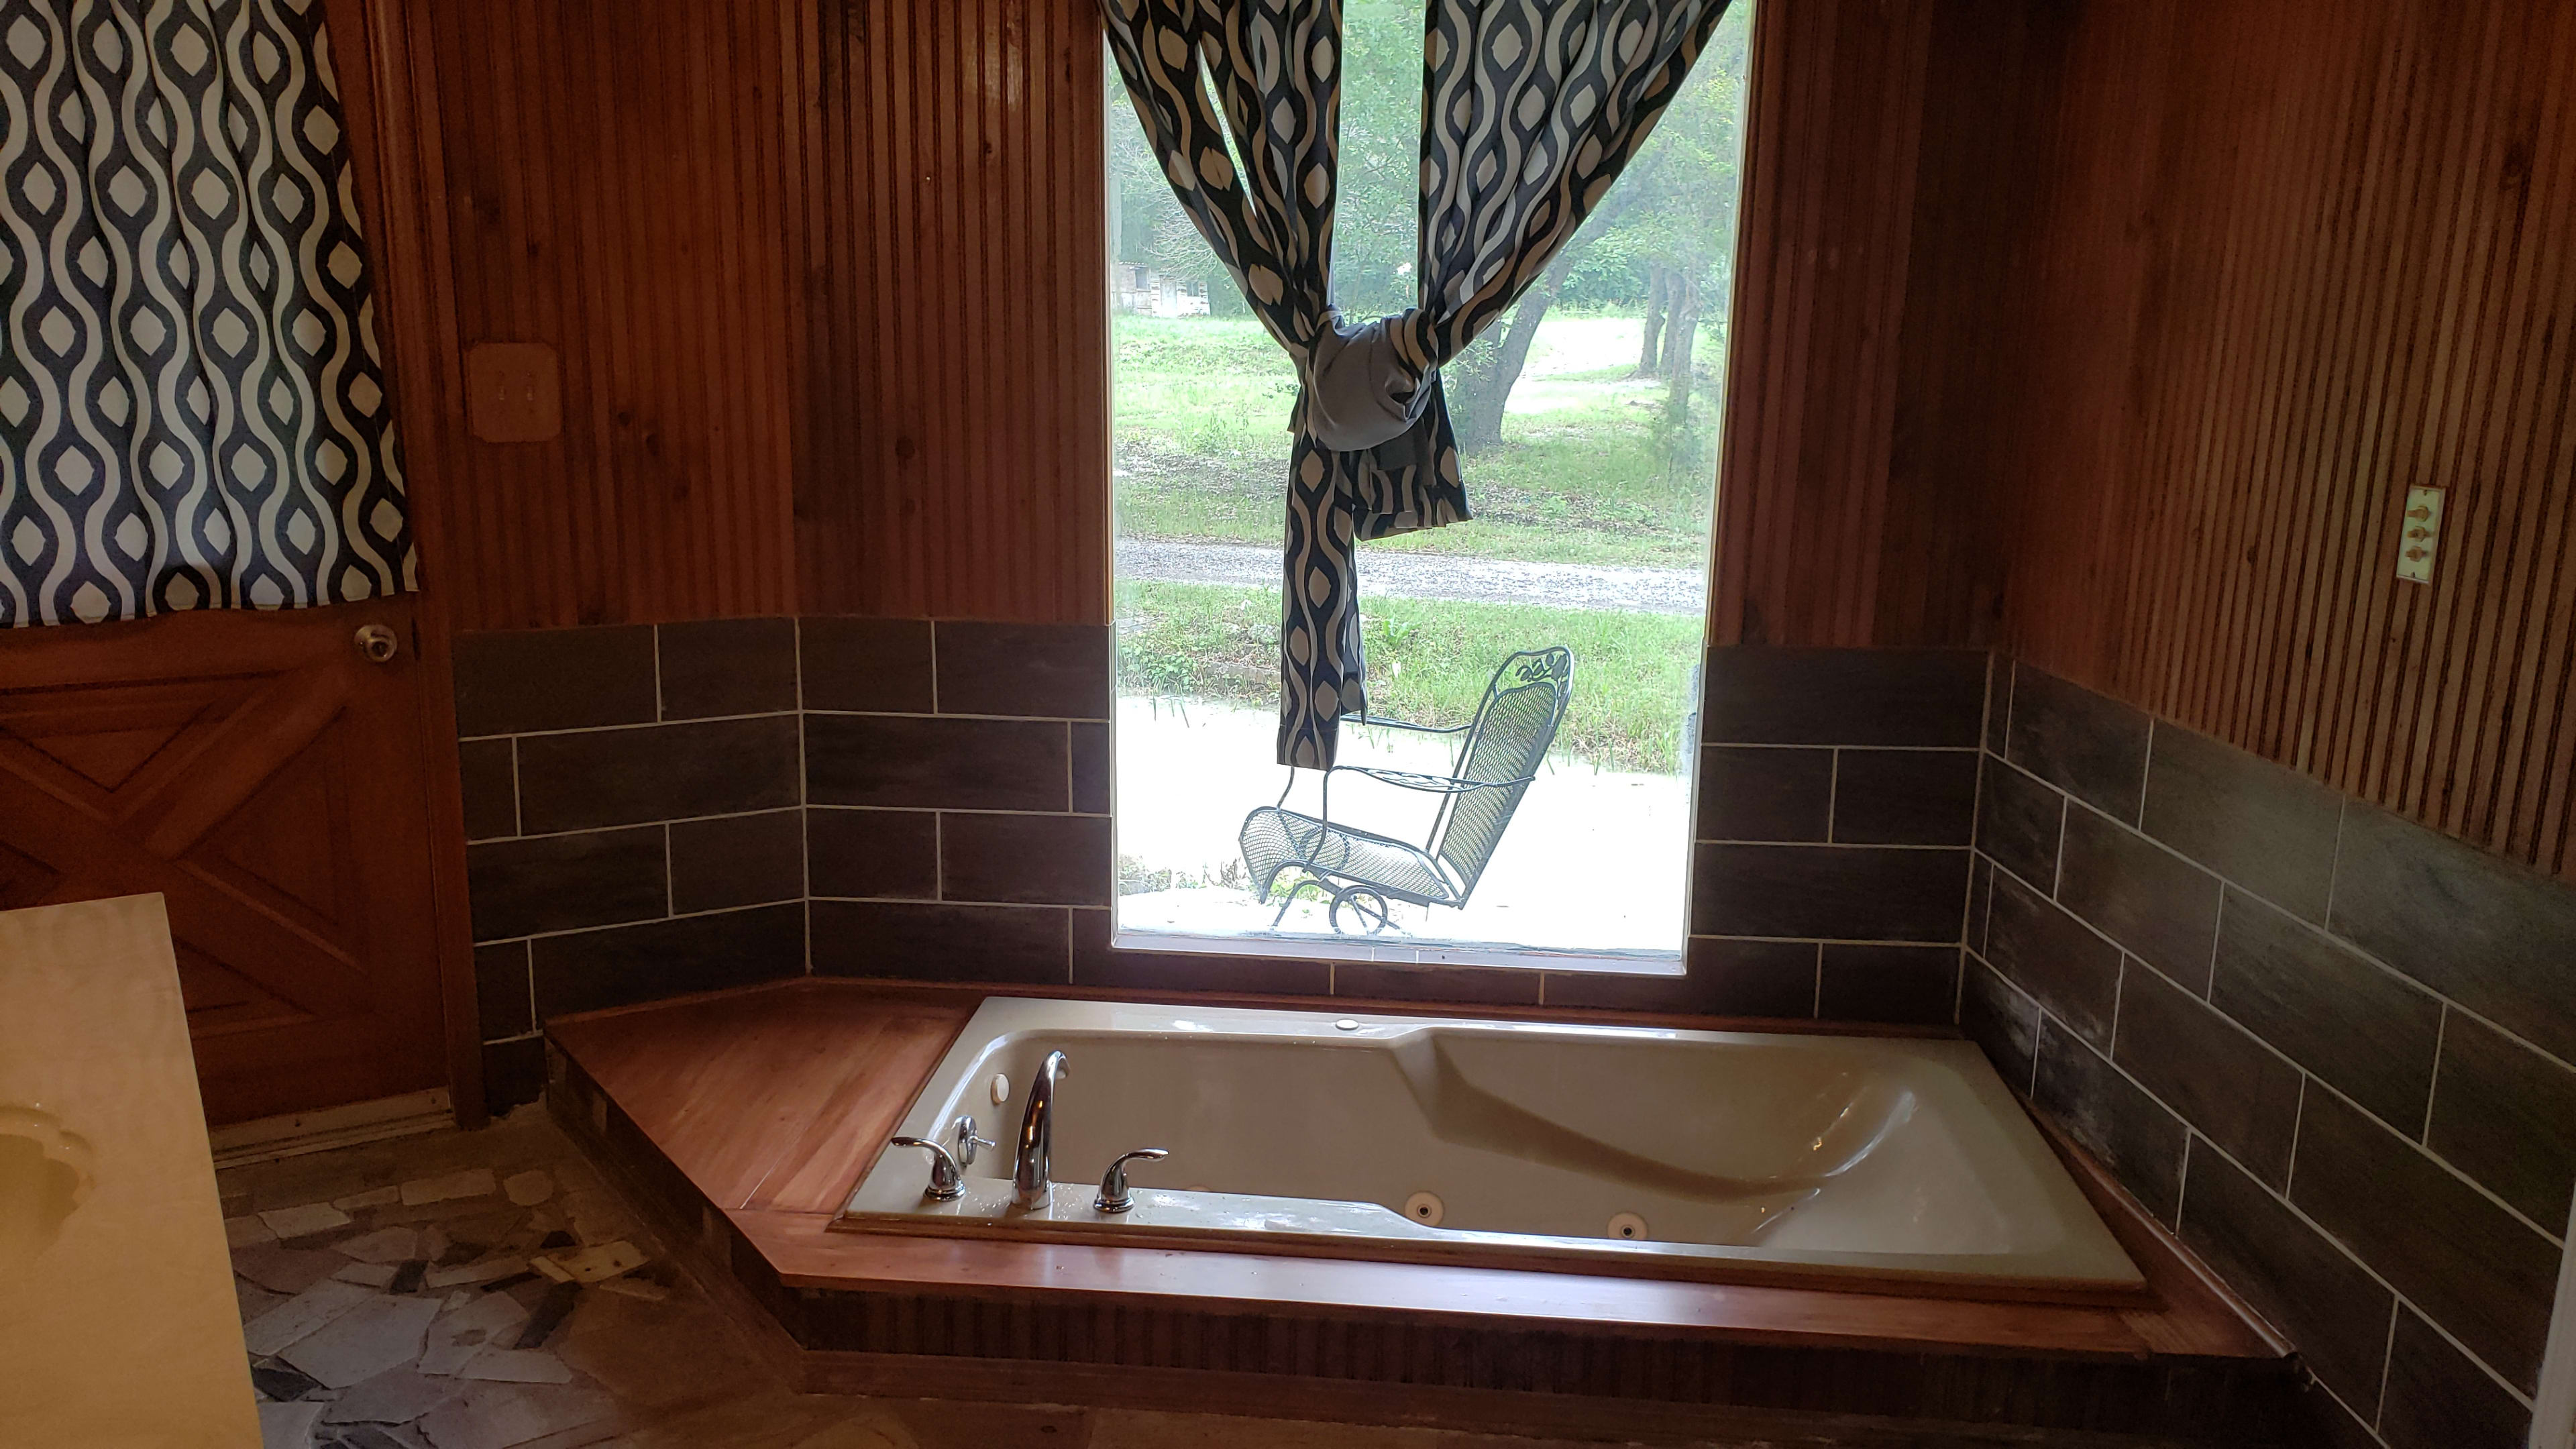 The jacuzzi tub